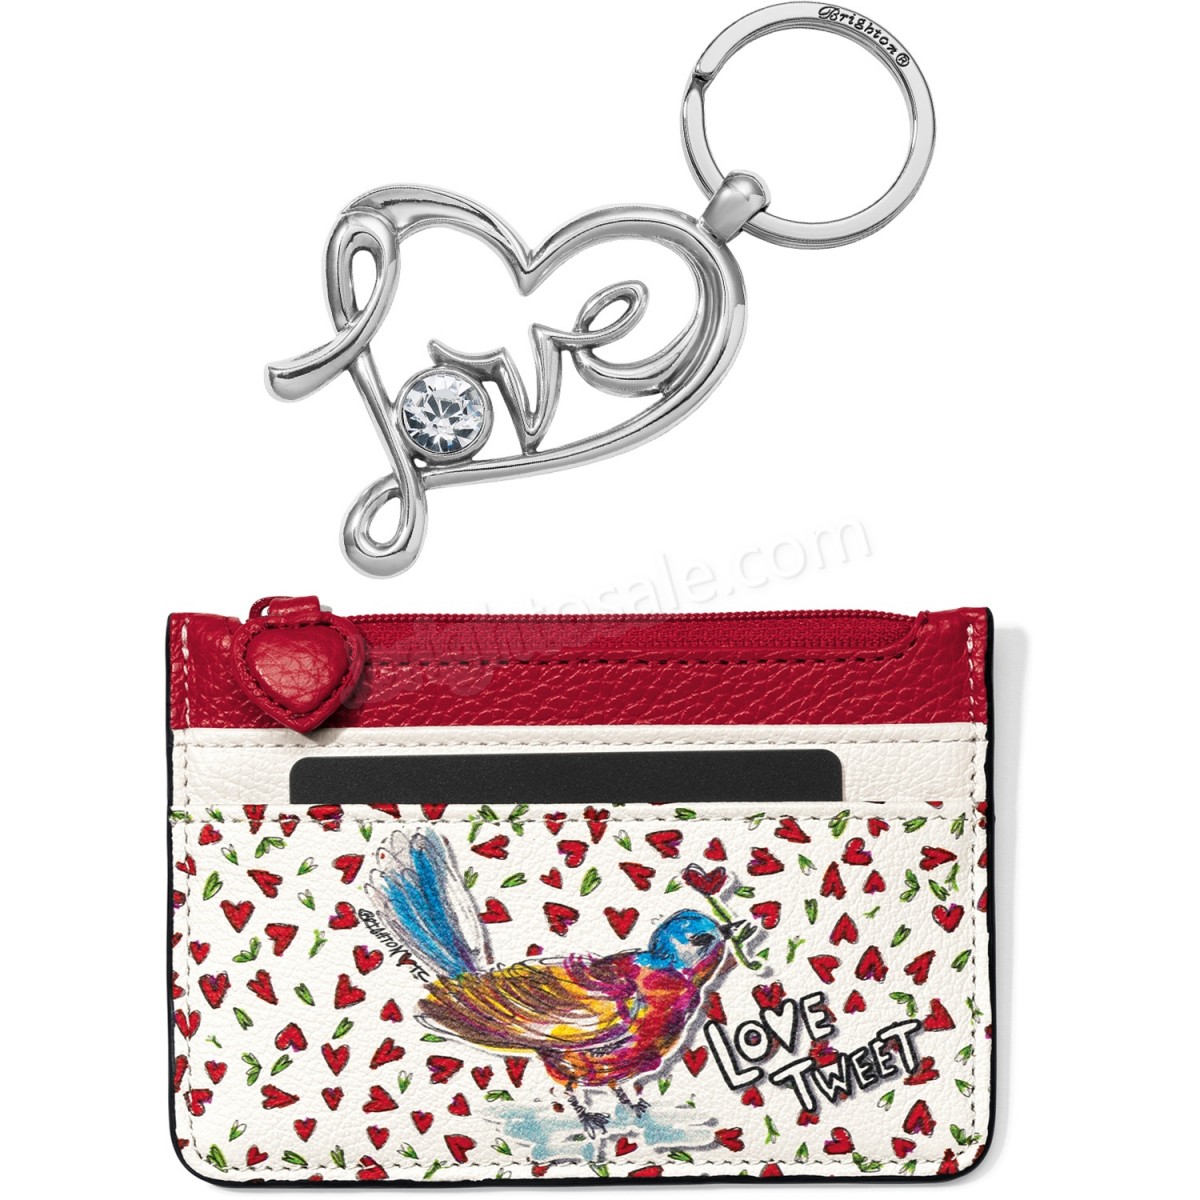 Brighton Collectibles & Online Discount Crazy Love Bright Cross Body Pouch - -0